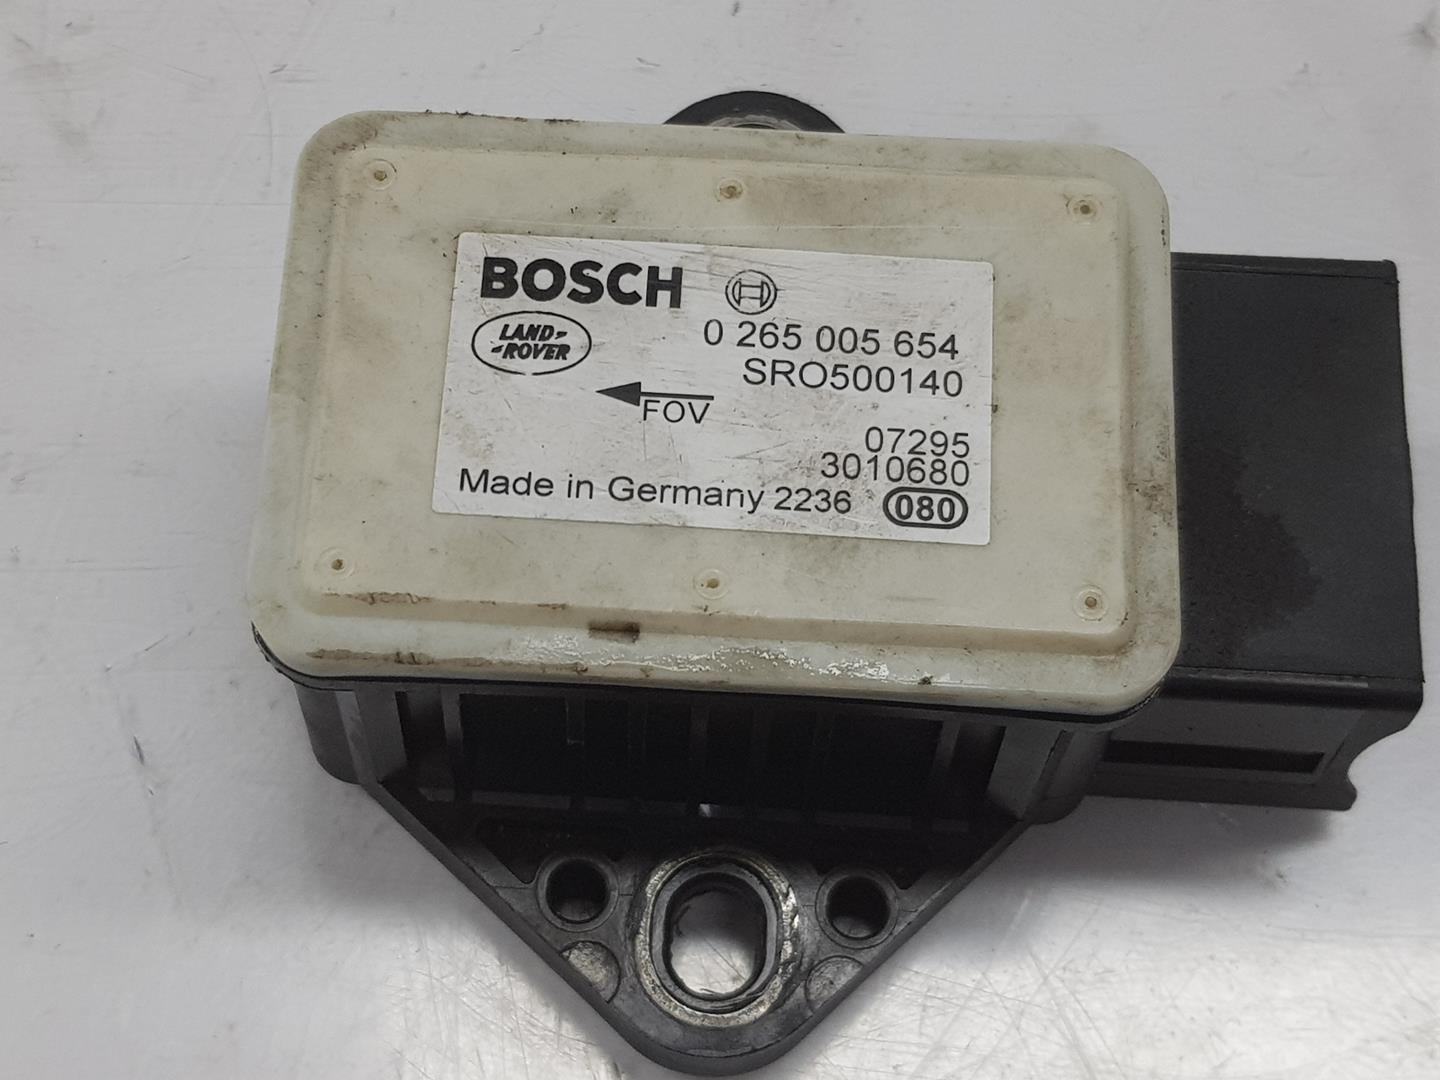 LAND ROVER Range Rover 3 generation (2002-2012) Other Control Units SRO500140, 7H4214B296AA 24195391